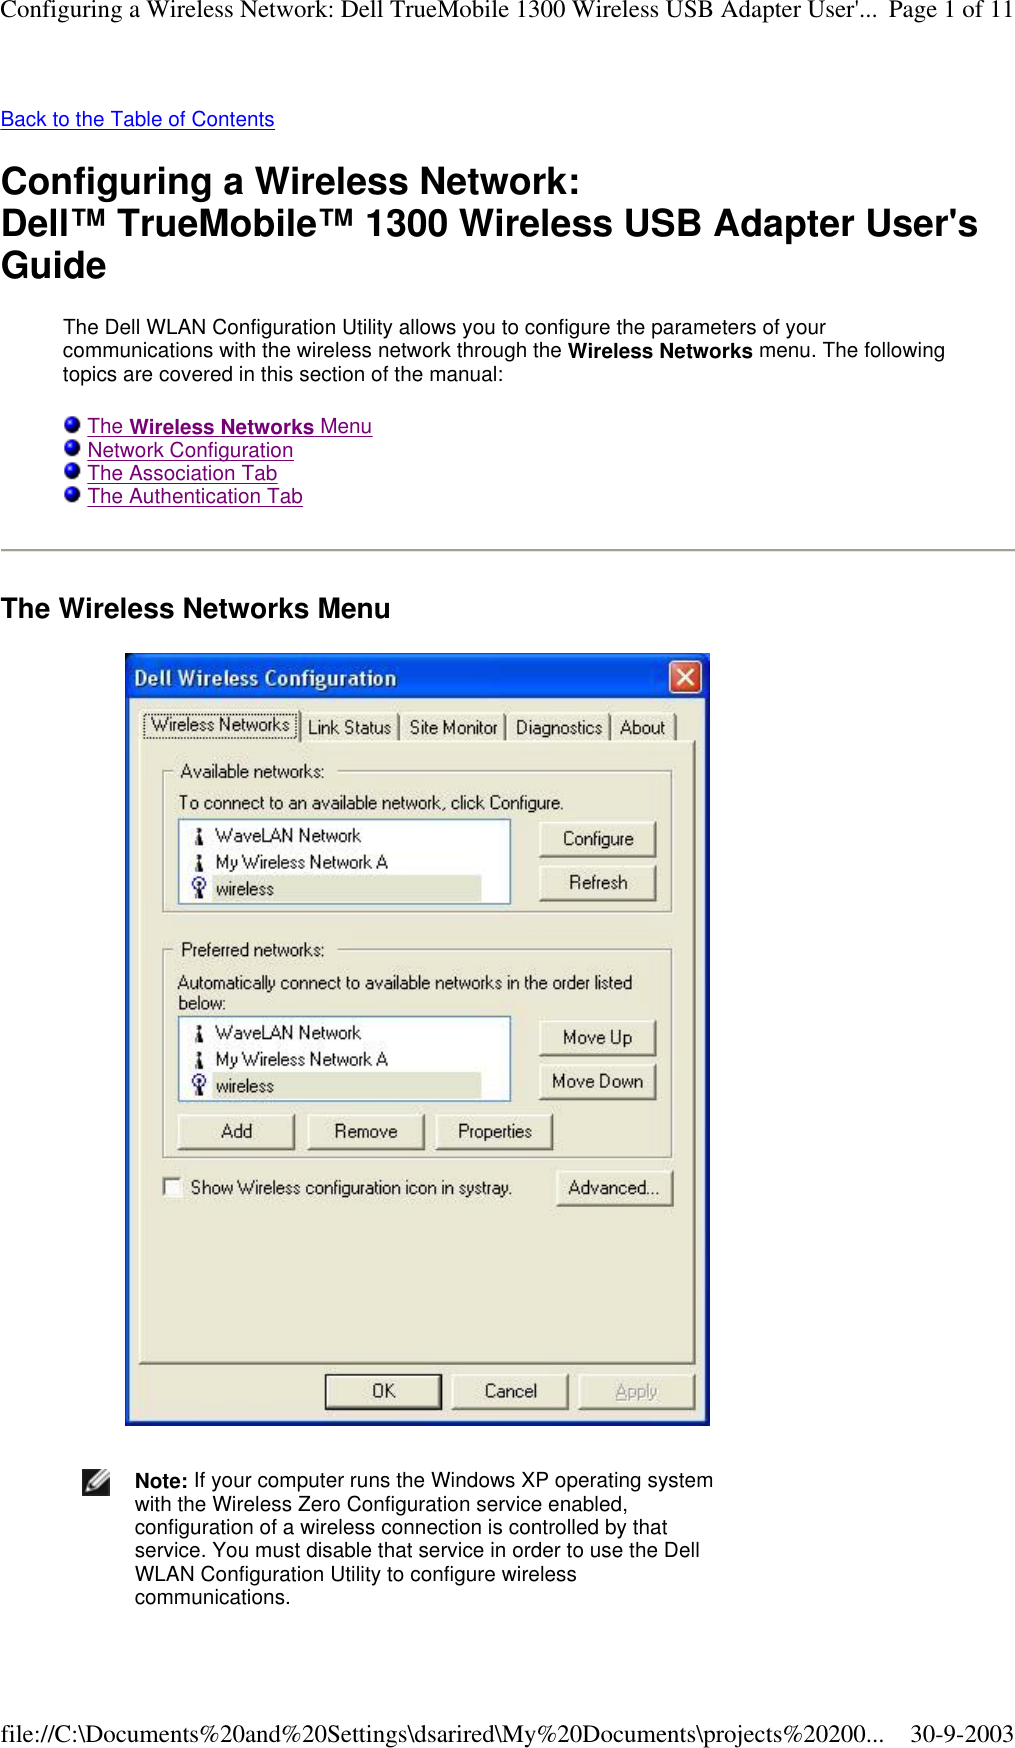 Back to the Table of Contents  Configuring a Wireless Network: Dell™ TrueMobile™ 1300 Wireless USB Adapter User&apos;s Guide The Dell WLAN Configuration Utility allows you to configure the parameters of your communications with the wireless network through the Wireless Networks menu. The following topics are covered in this section of the manual:   The Wireless Networks Menu  Network Configuration  The Association Tab  The Authentication Tab The Wireless Networks Menu   Note: If your computer runs the Windows XP operating system with the Wireless Zero Configuration service enabled, configuration of a wireless connection is controlled by that service. You must disable that service in order to use the Dell WLAN Configuration Utility to configure wireless communications.Page 1 of 11Configuring a Wireless Network: Dell TrueMobile 1300 Wireless USB Adapter User&apos;...30-9-2003file://C:\Documents%20and%20Settings\dsarired\My%20Documents\projects%20200...